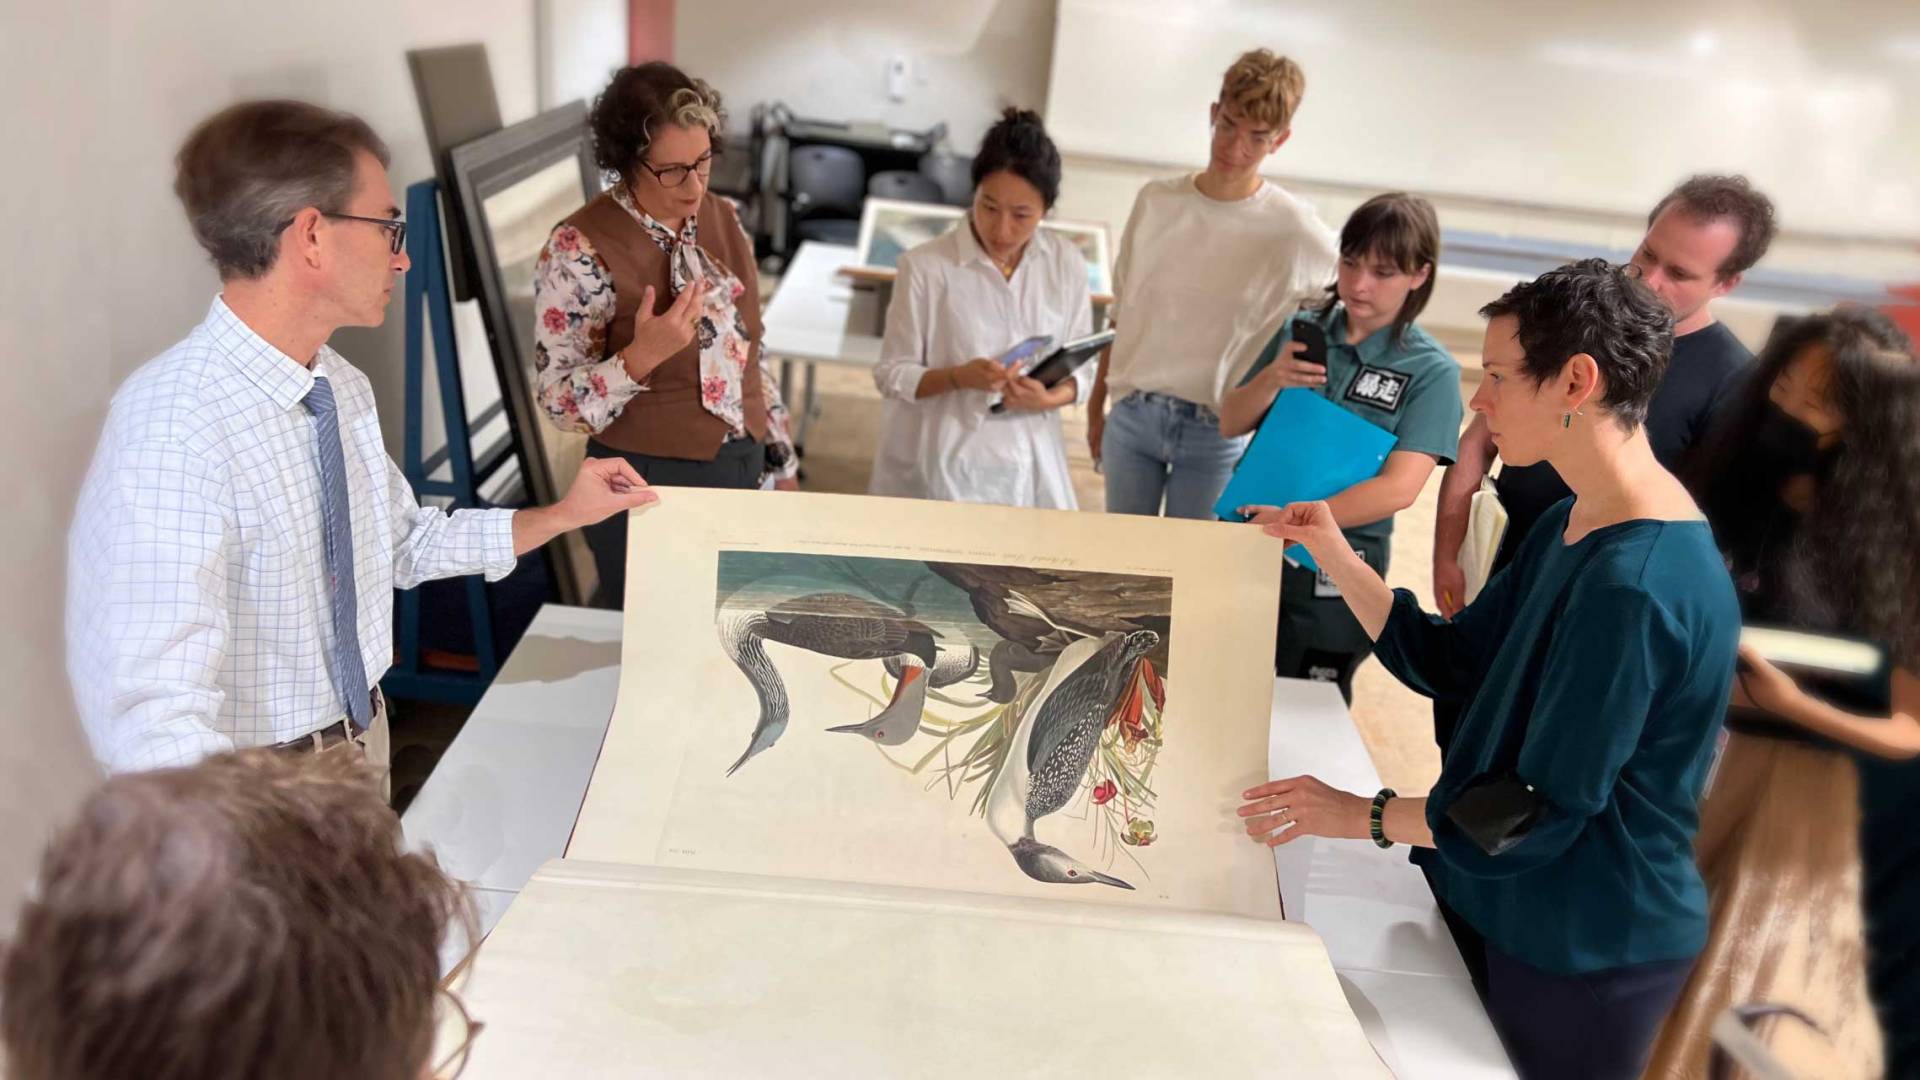 How art by Audubon, Darwin and others influenced science Insights from a Princeton course